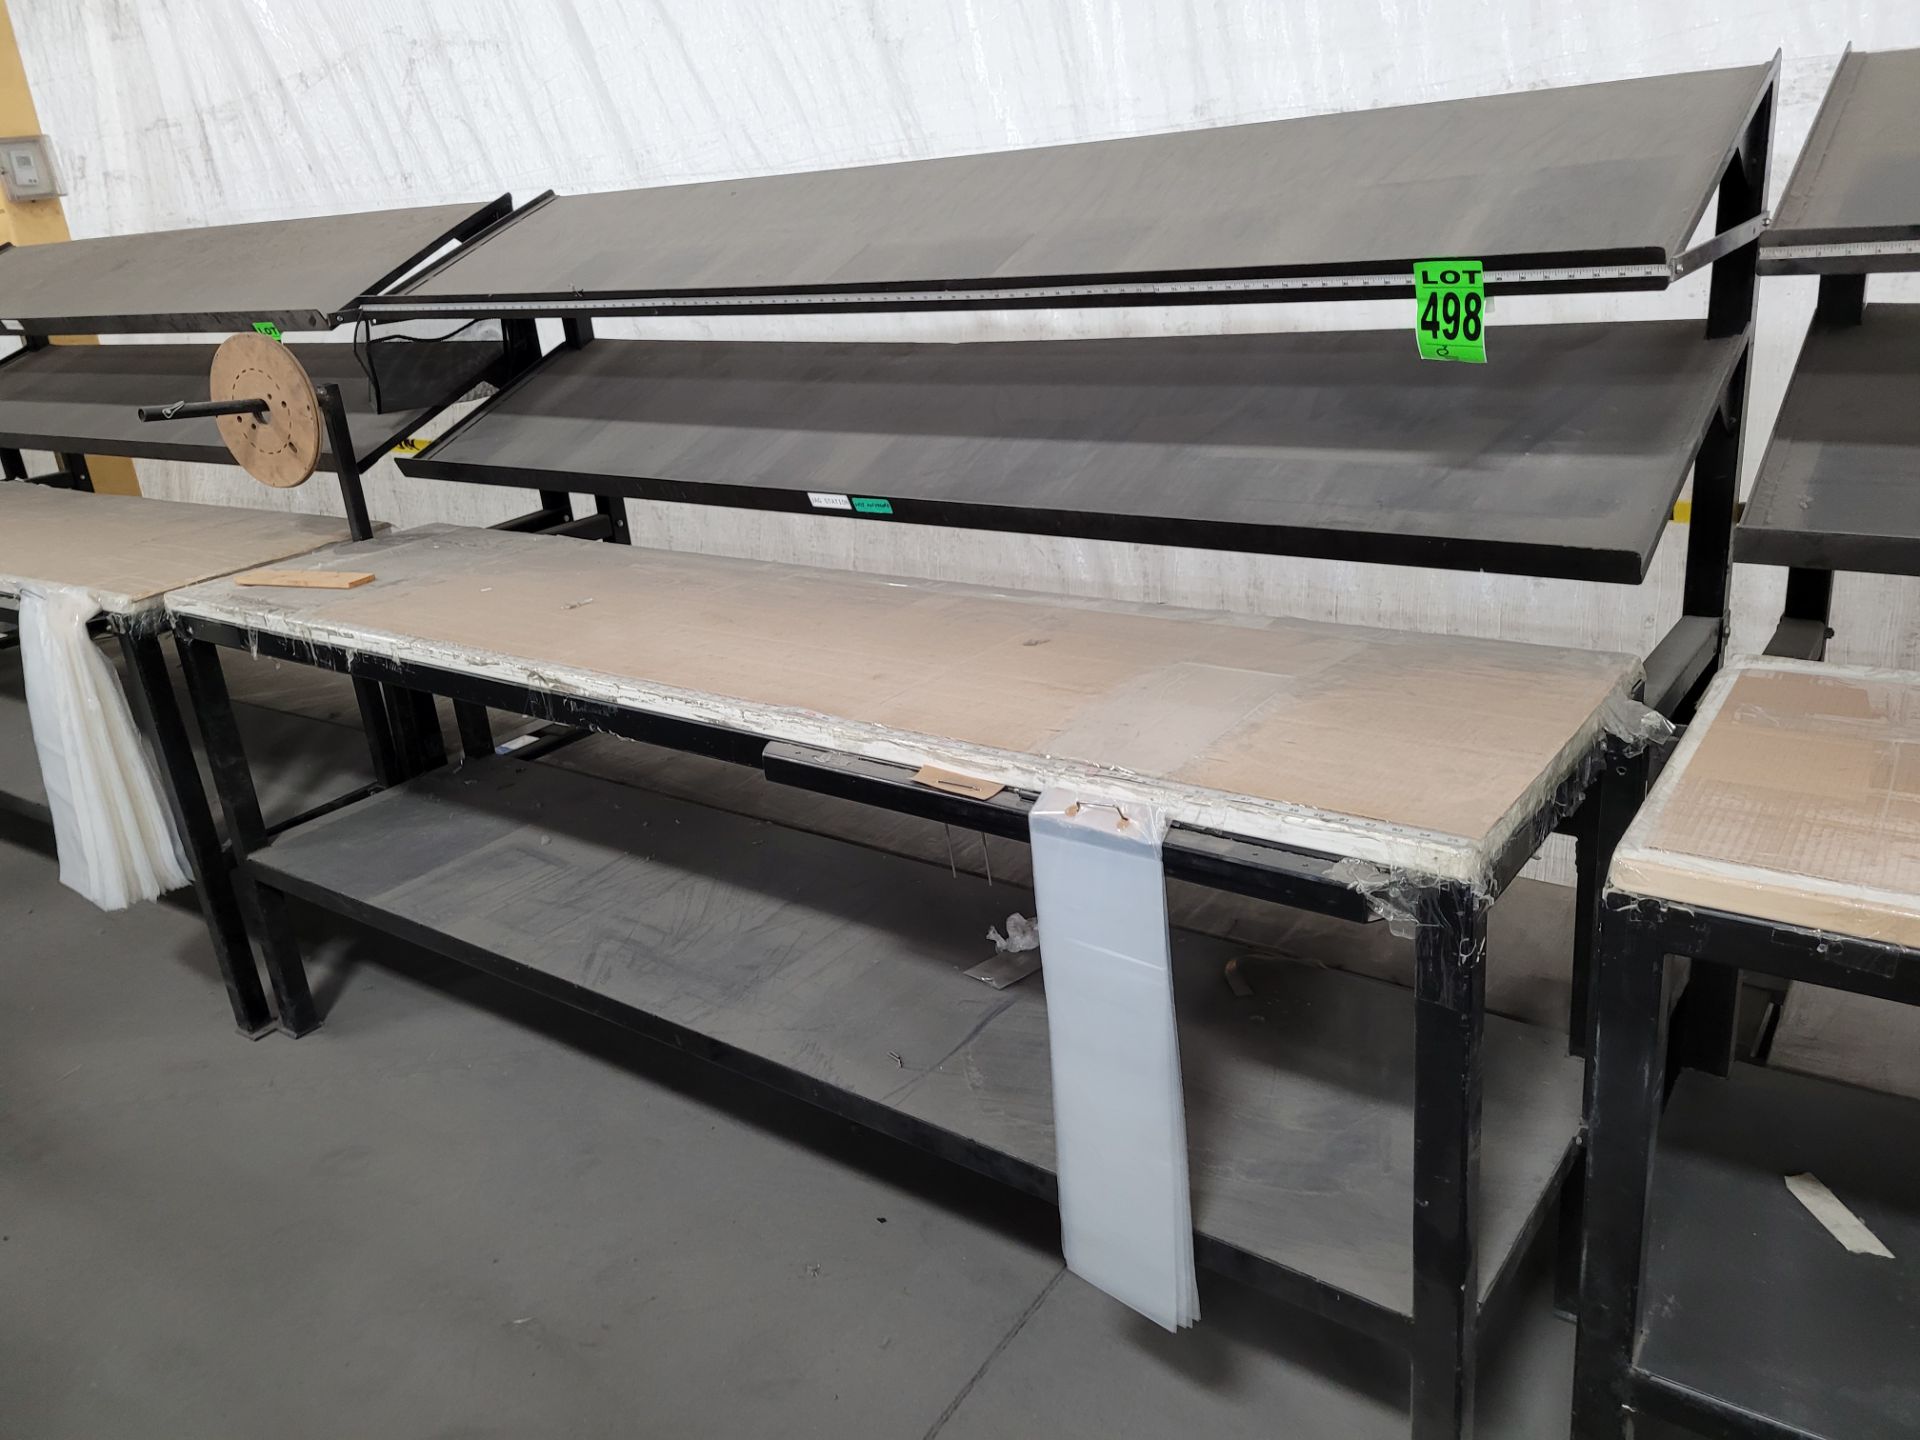 Steel frame 2-level inspection table with wood surface, 2 inclined backboard shelves